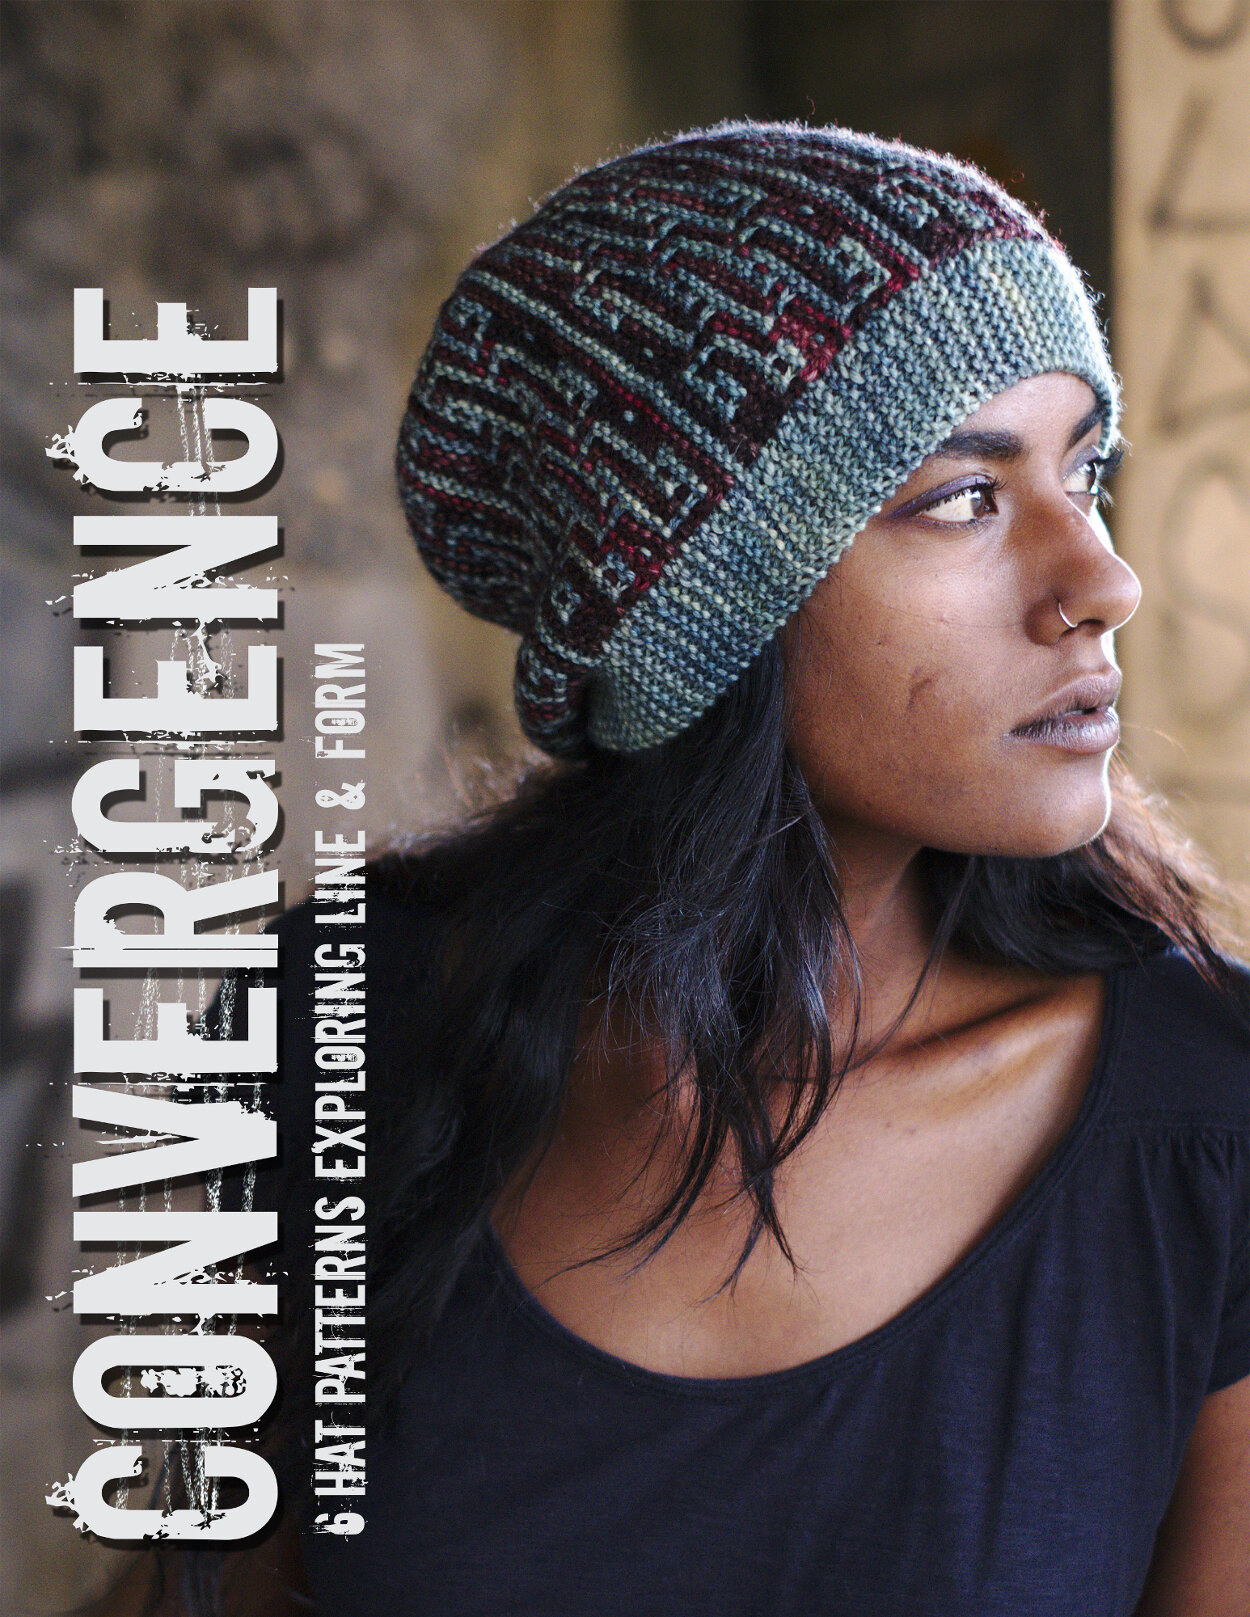 Convergence collection of 6 sideways knit mosaic Hat designs